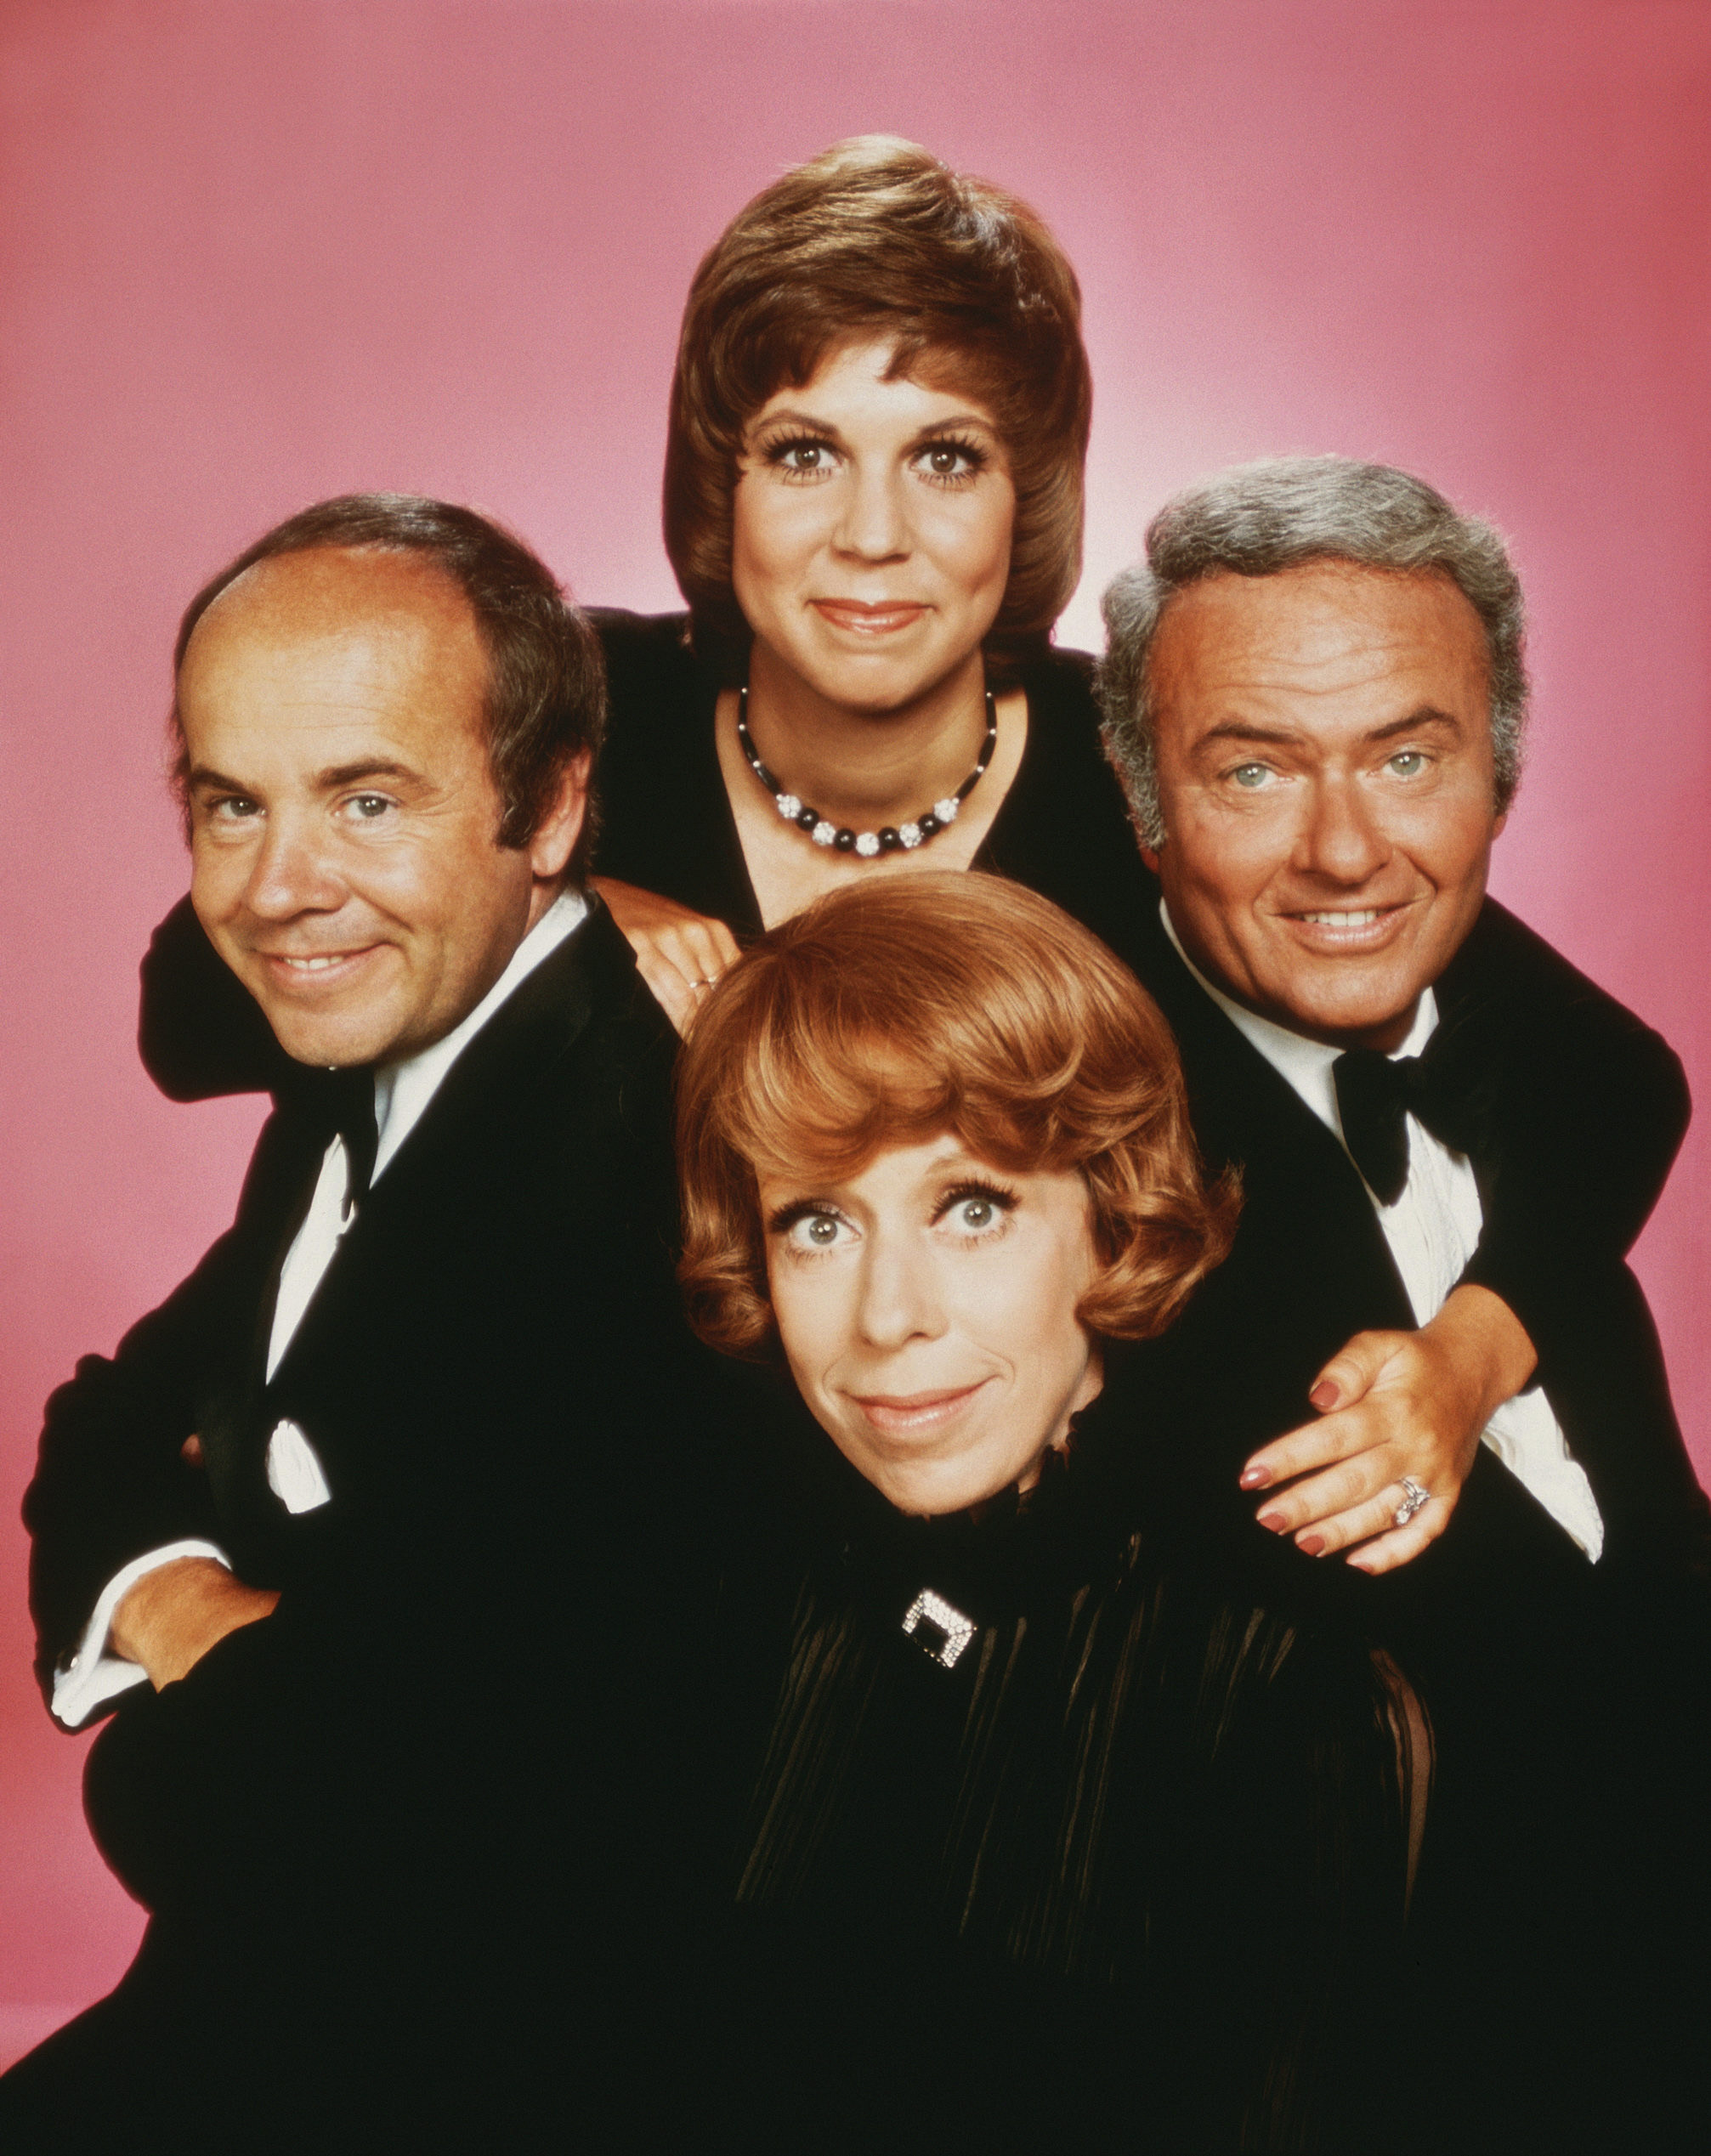 Clockwise from top: Cast portrait of Vicki Lawrence, Harvey Korman, Carol Burnett and Tim Conway in "'The Carol Burnett Show" on January 1, 1975 | Source: Getty Images